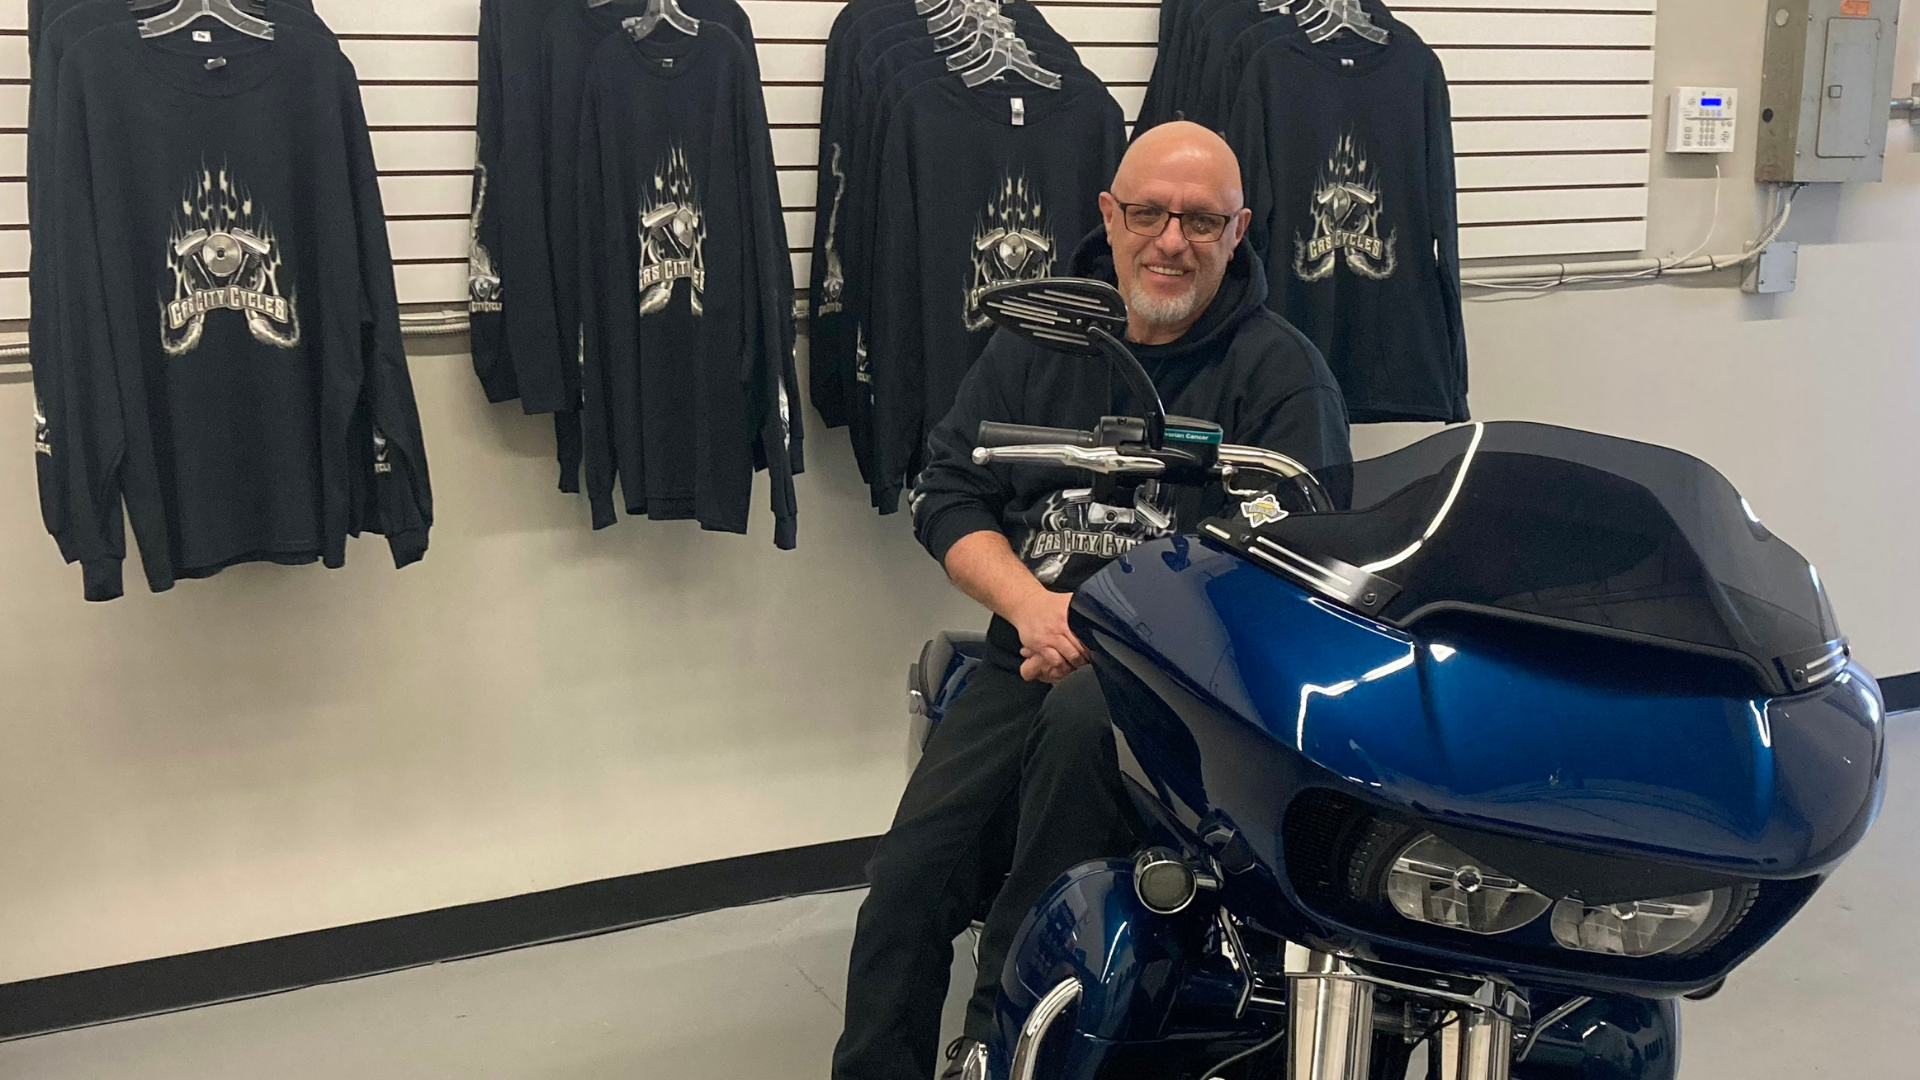 New local business Gas City Cycles opens up shop with the help of the Regular Loan